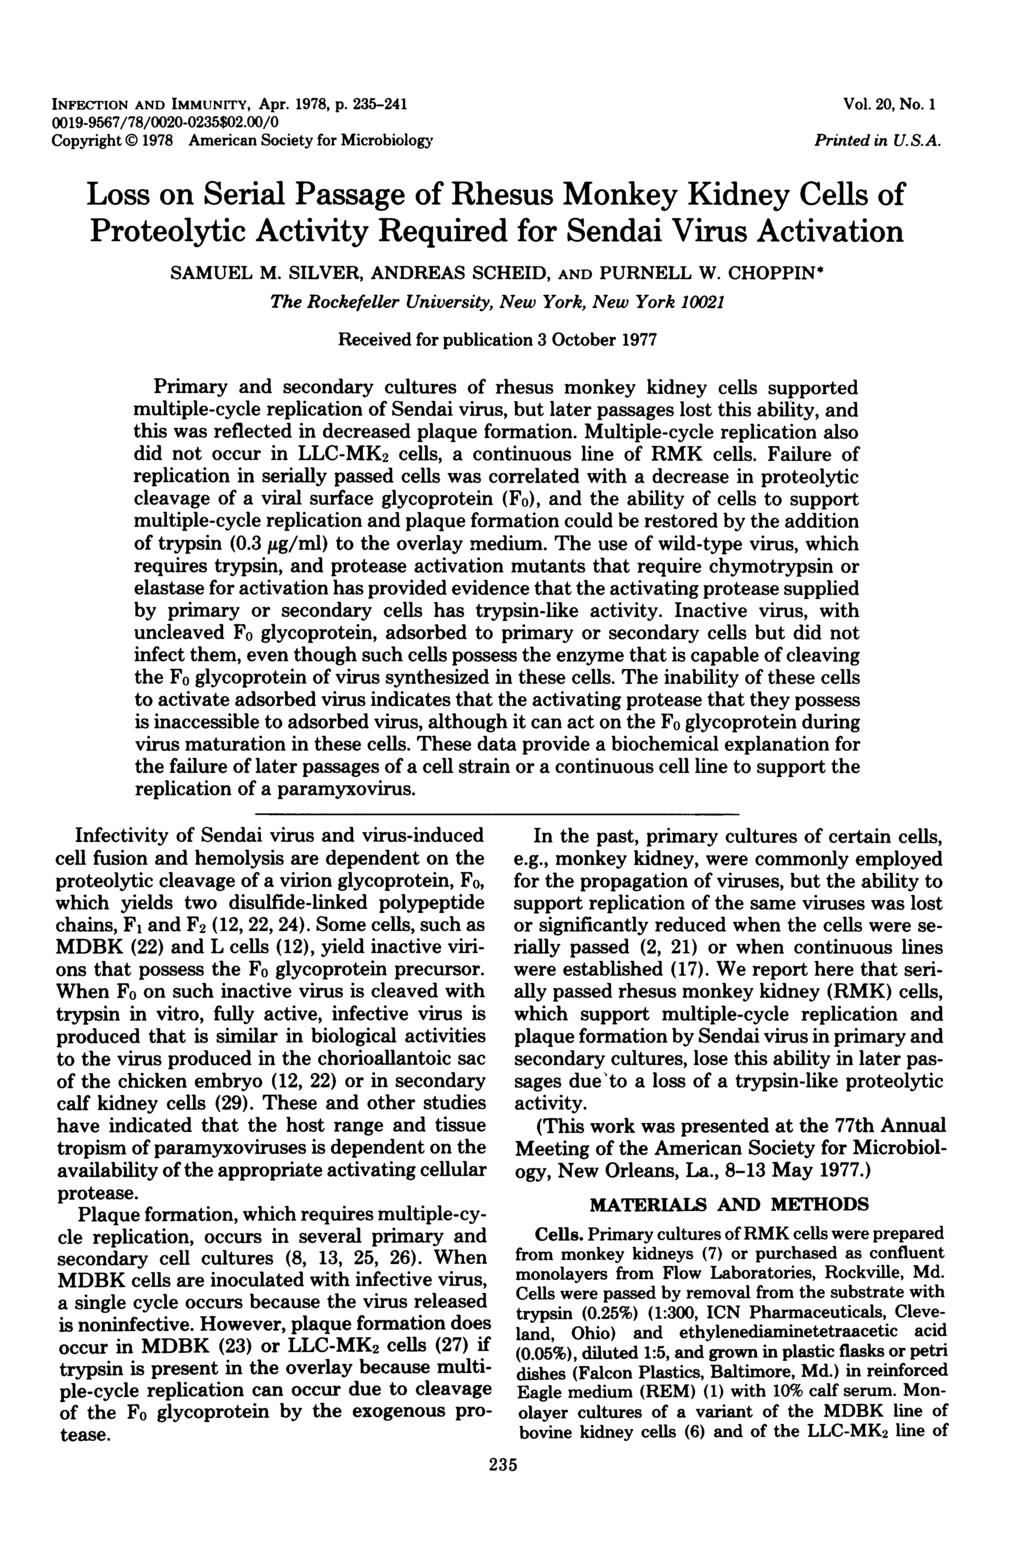 INFECTION AND IMMUNITY, Apr. 1978, p. 235-241 0019-9567/78/0020-0235$02.00/0 Copyright 1978 American Society for Microbiology Vol. 20, No.